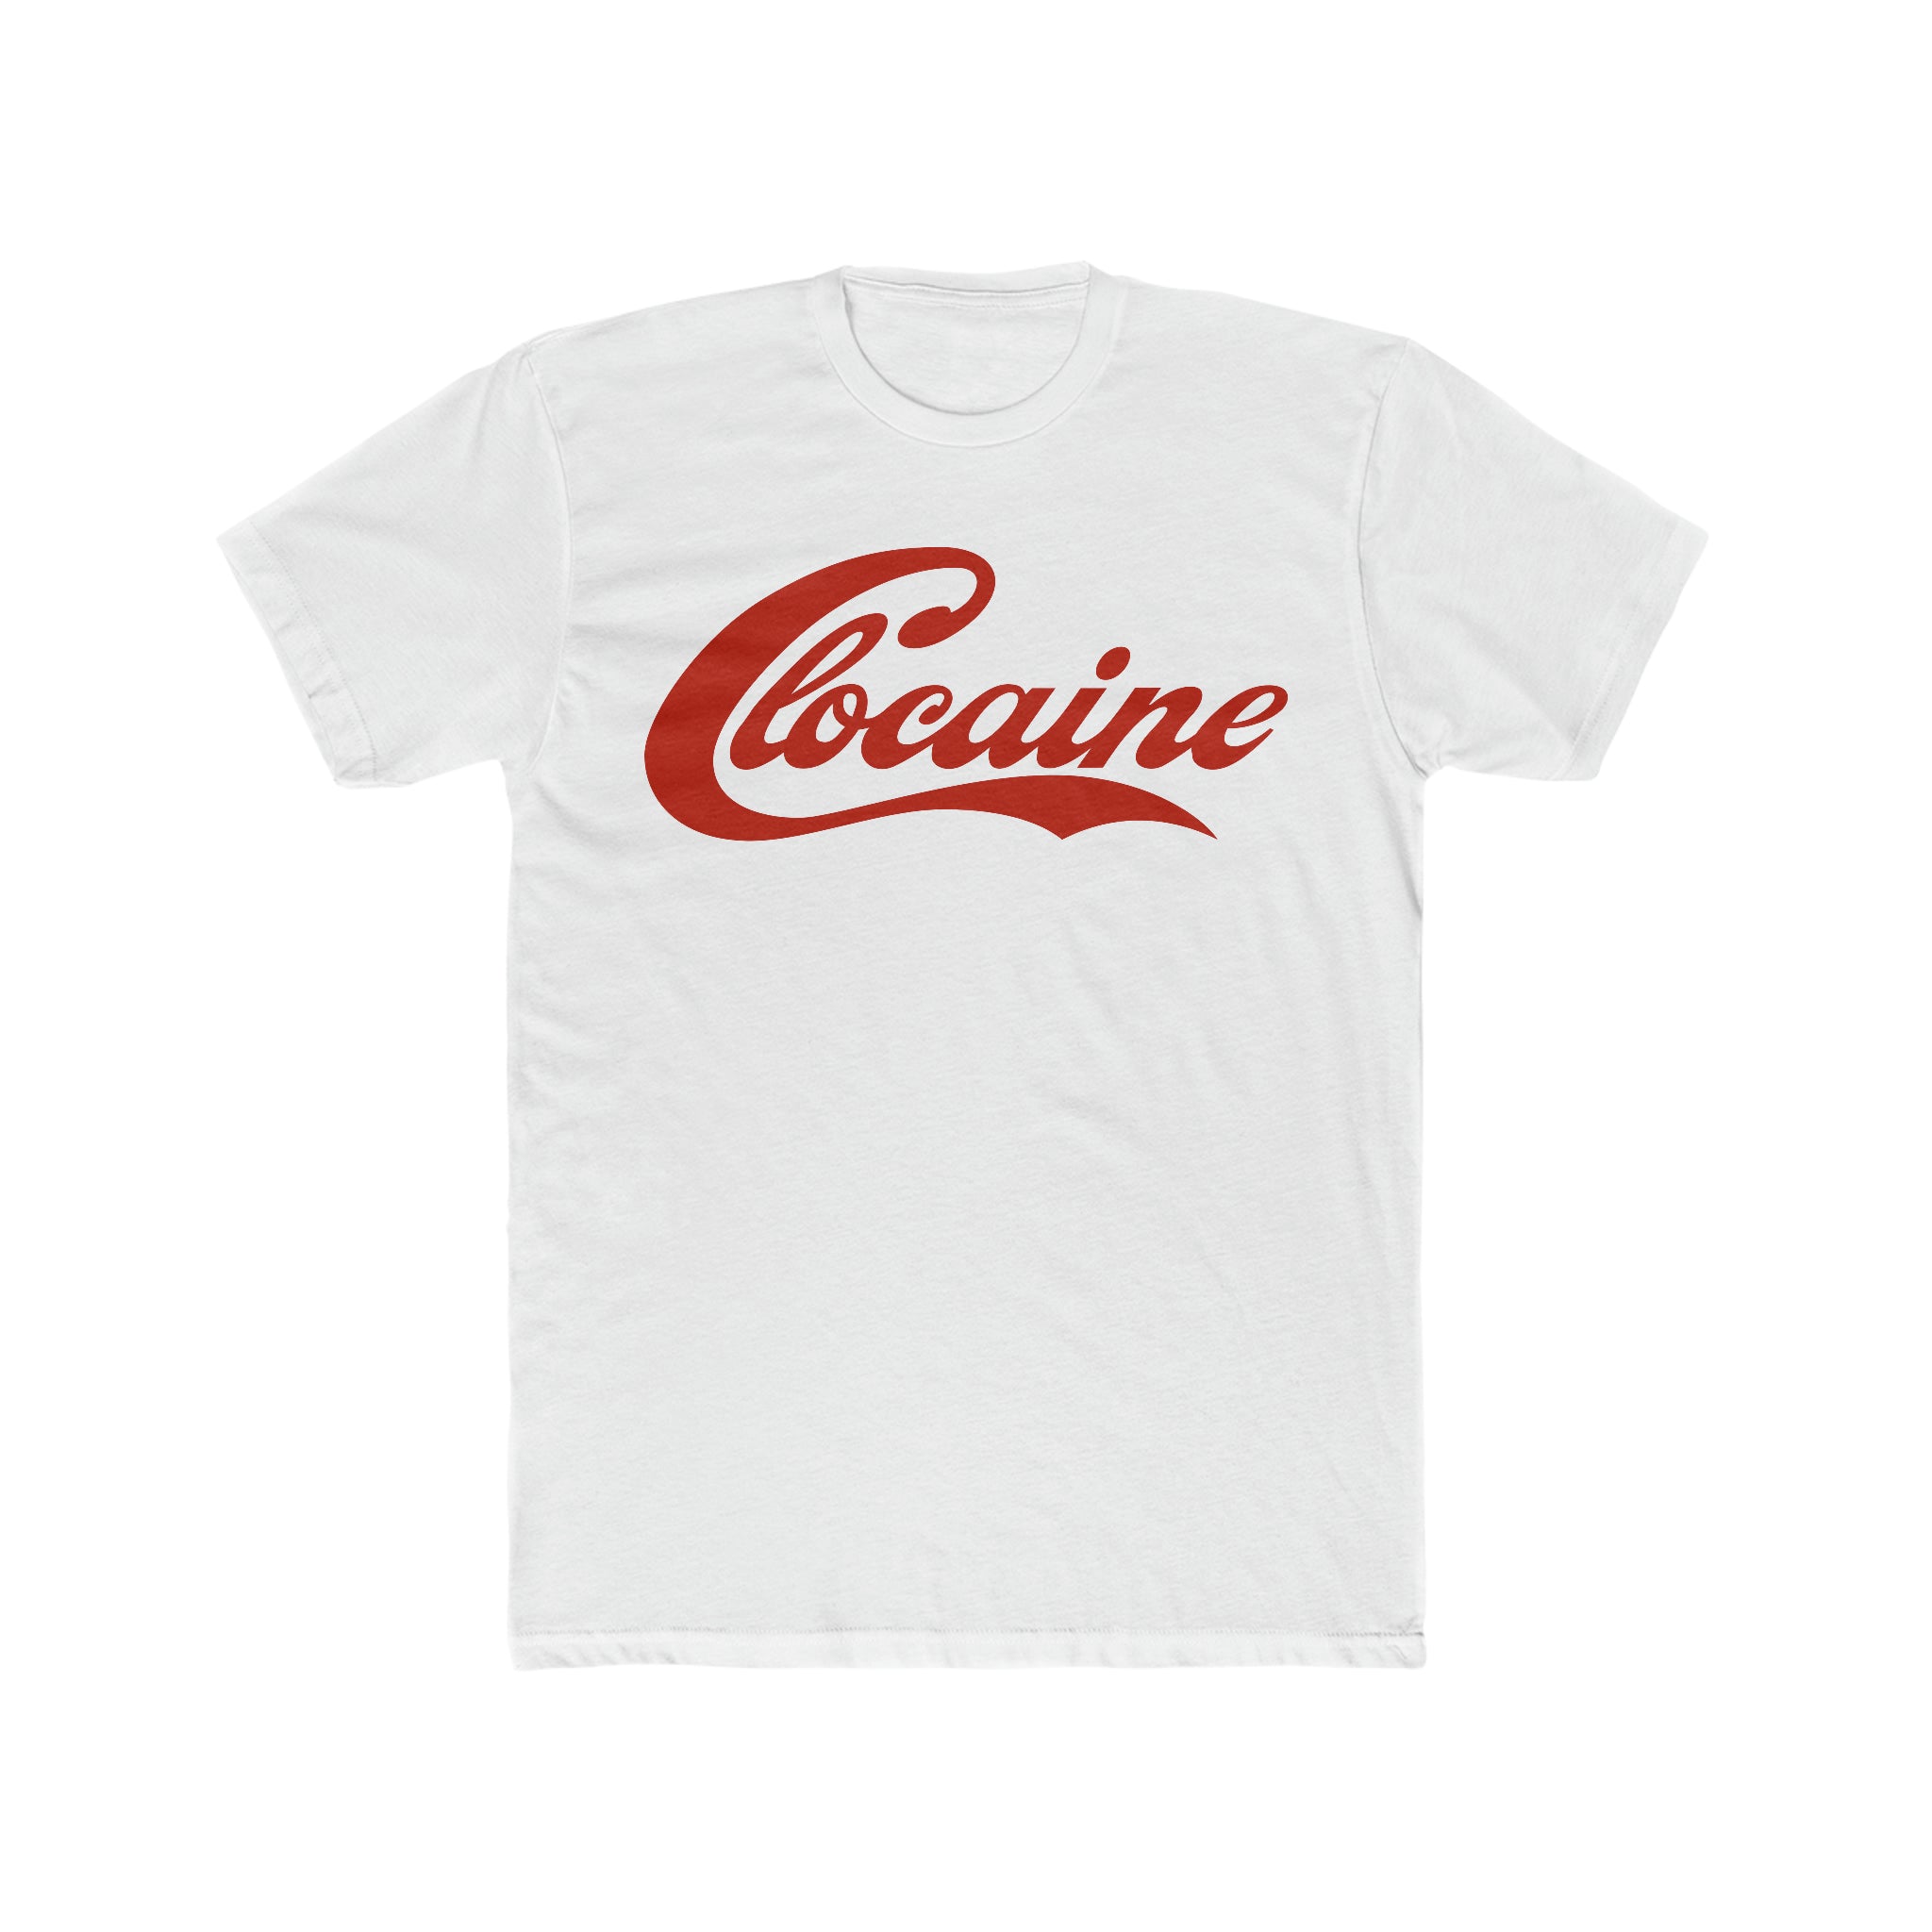 3RD EDITION CLOCAINE TEE (RED)